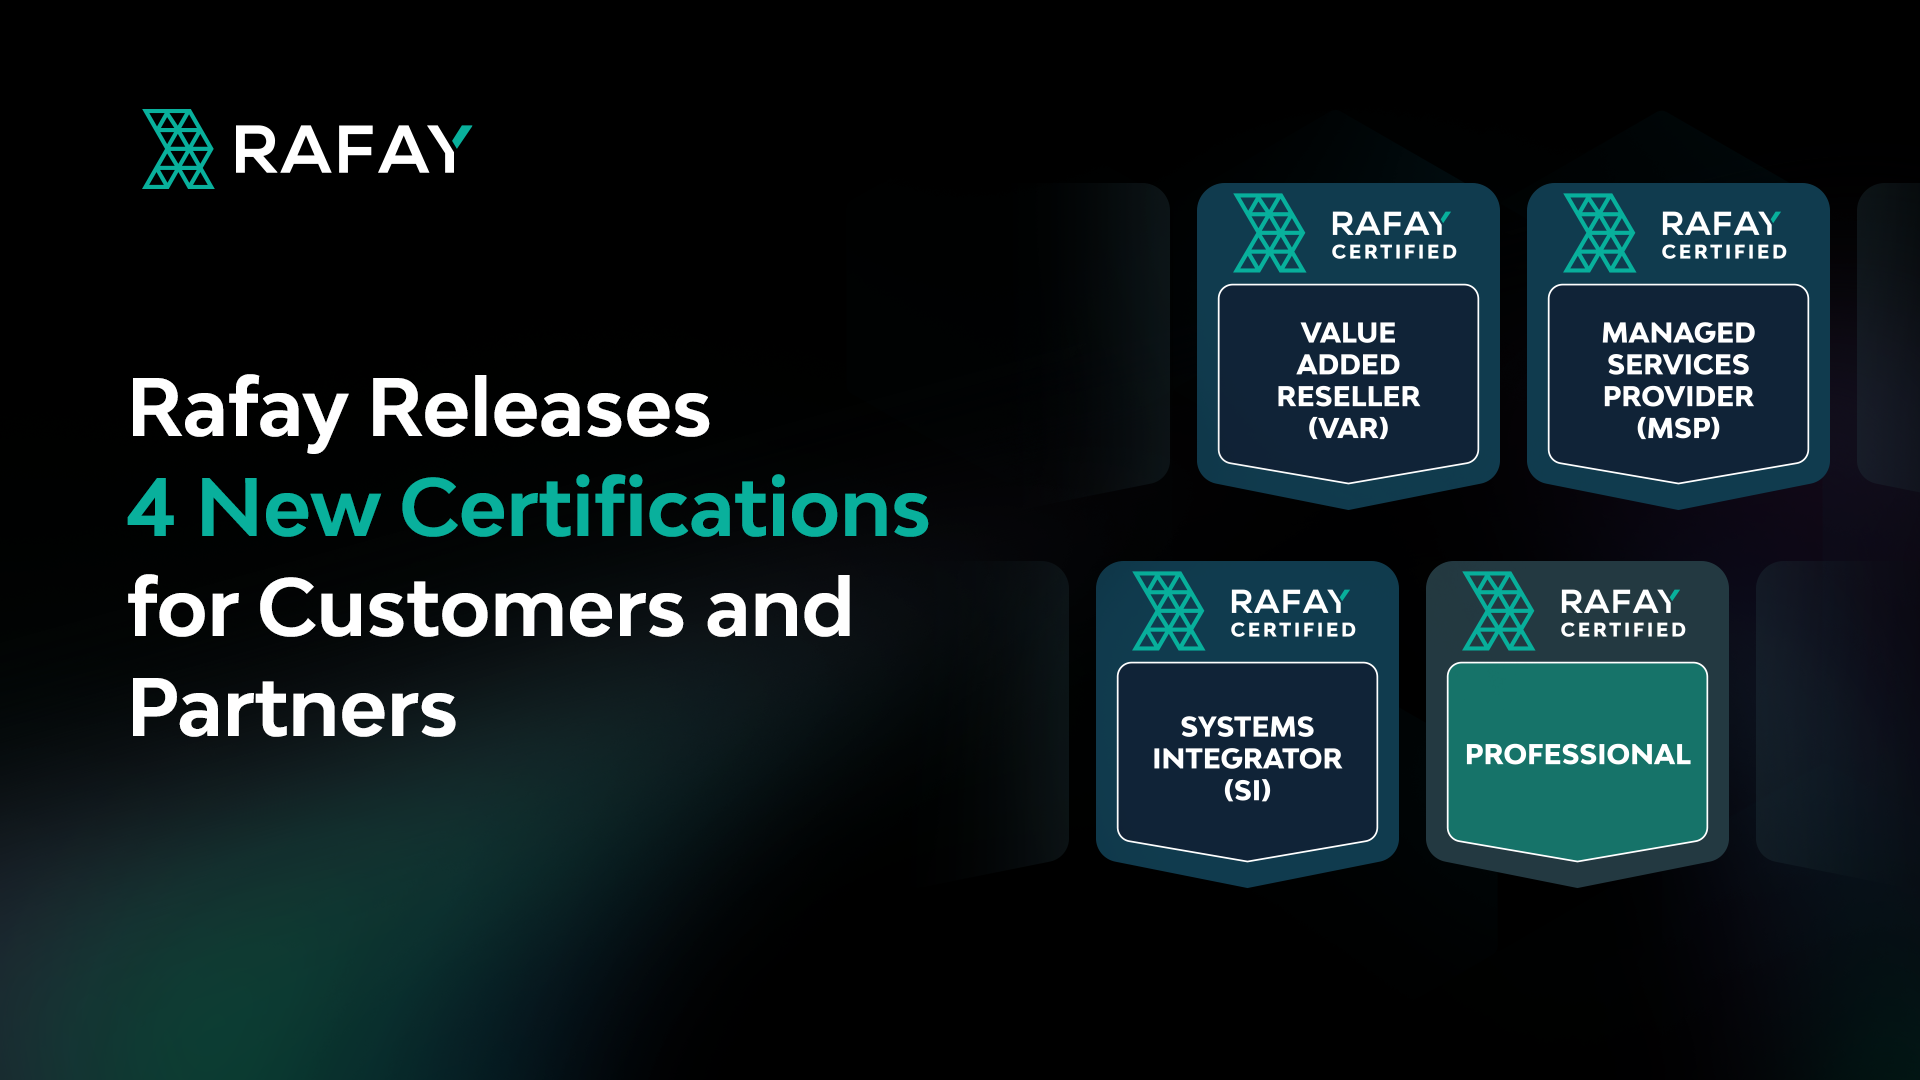 Image for Rafay Releases 4 New Certifications for Customers and Partners